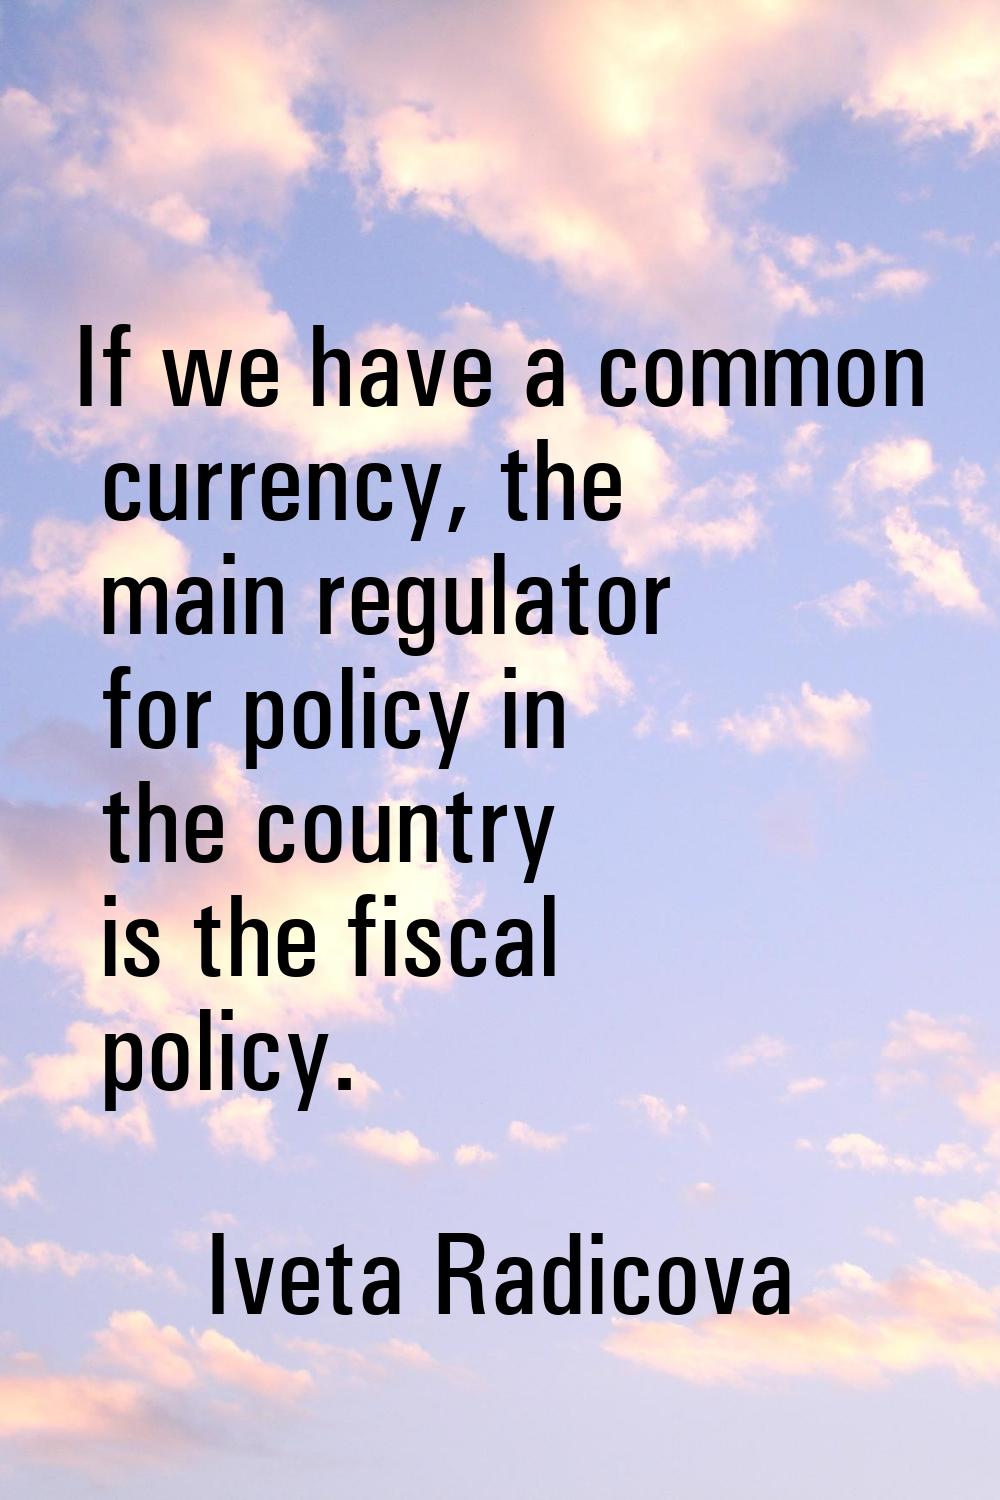 If we have a common currency, the main regulator for policy in the country is the fiscal policy.